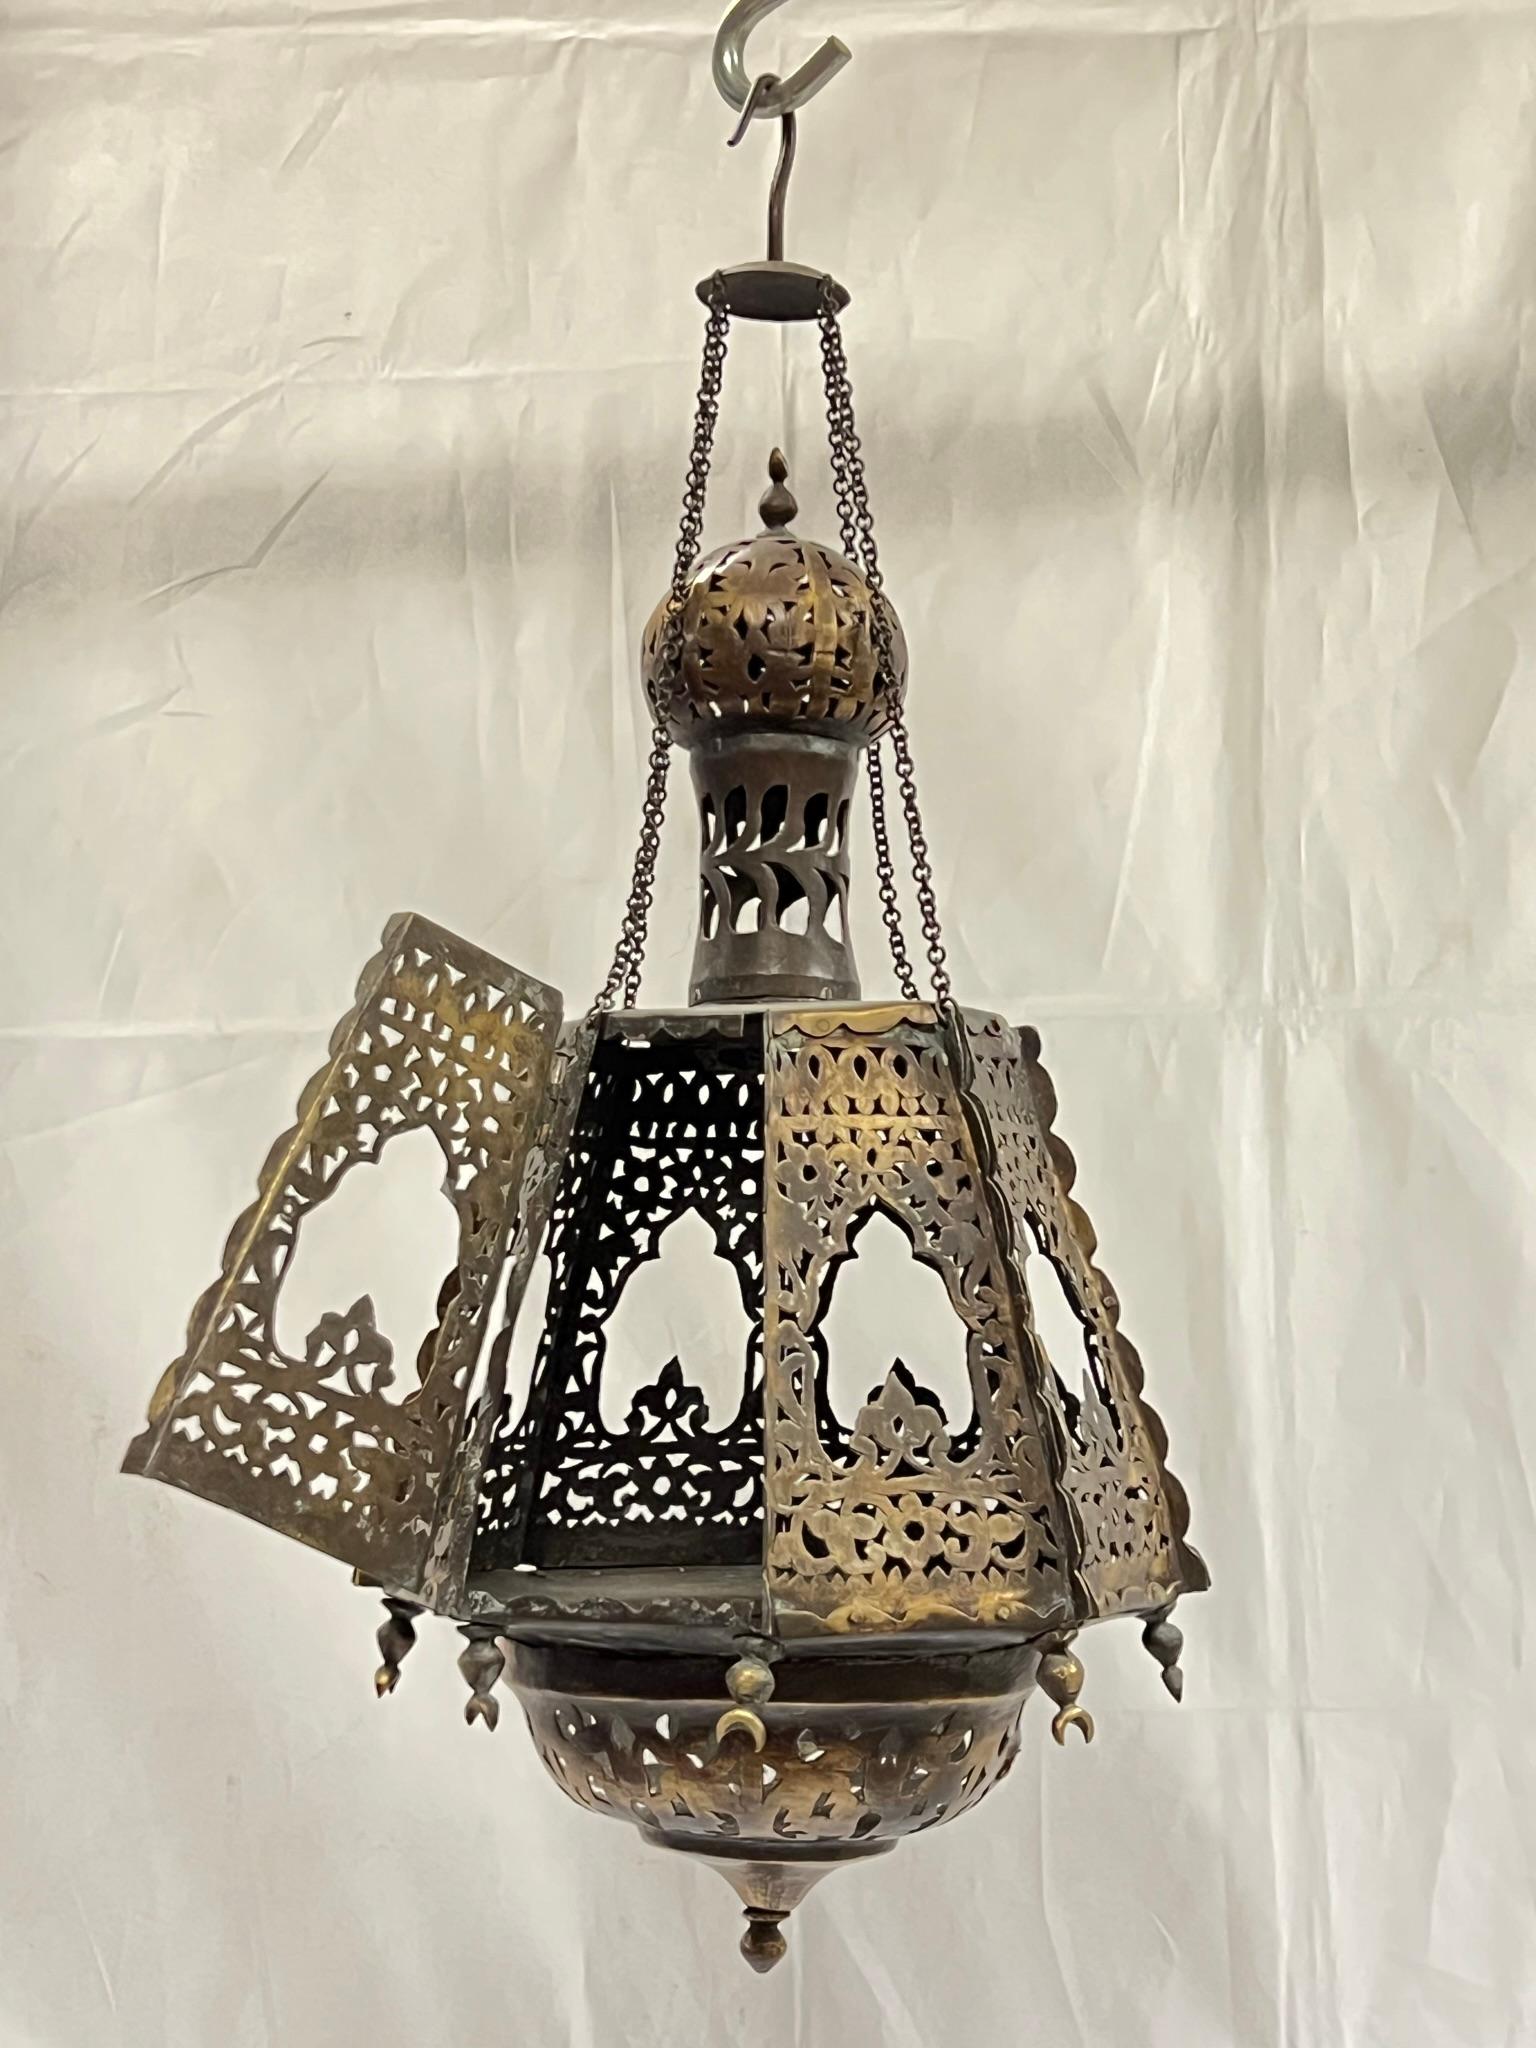 Antique openwork metal lantern with minaret top, Islamic crescent moon designs, and hexagonal shaped body with door on hinge revealing open compartment to house candles.